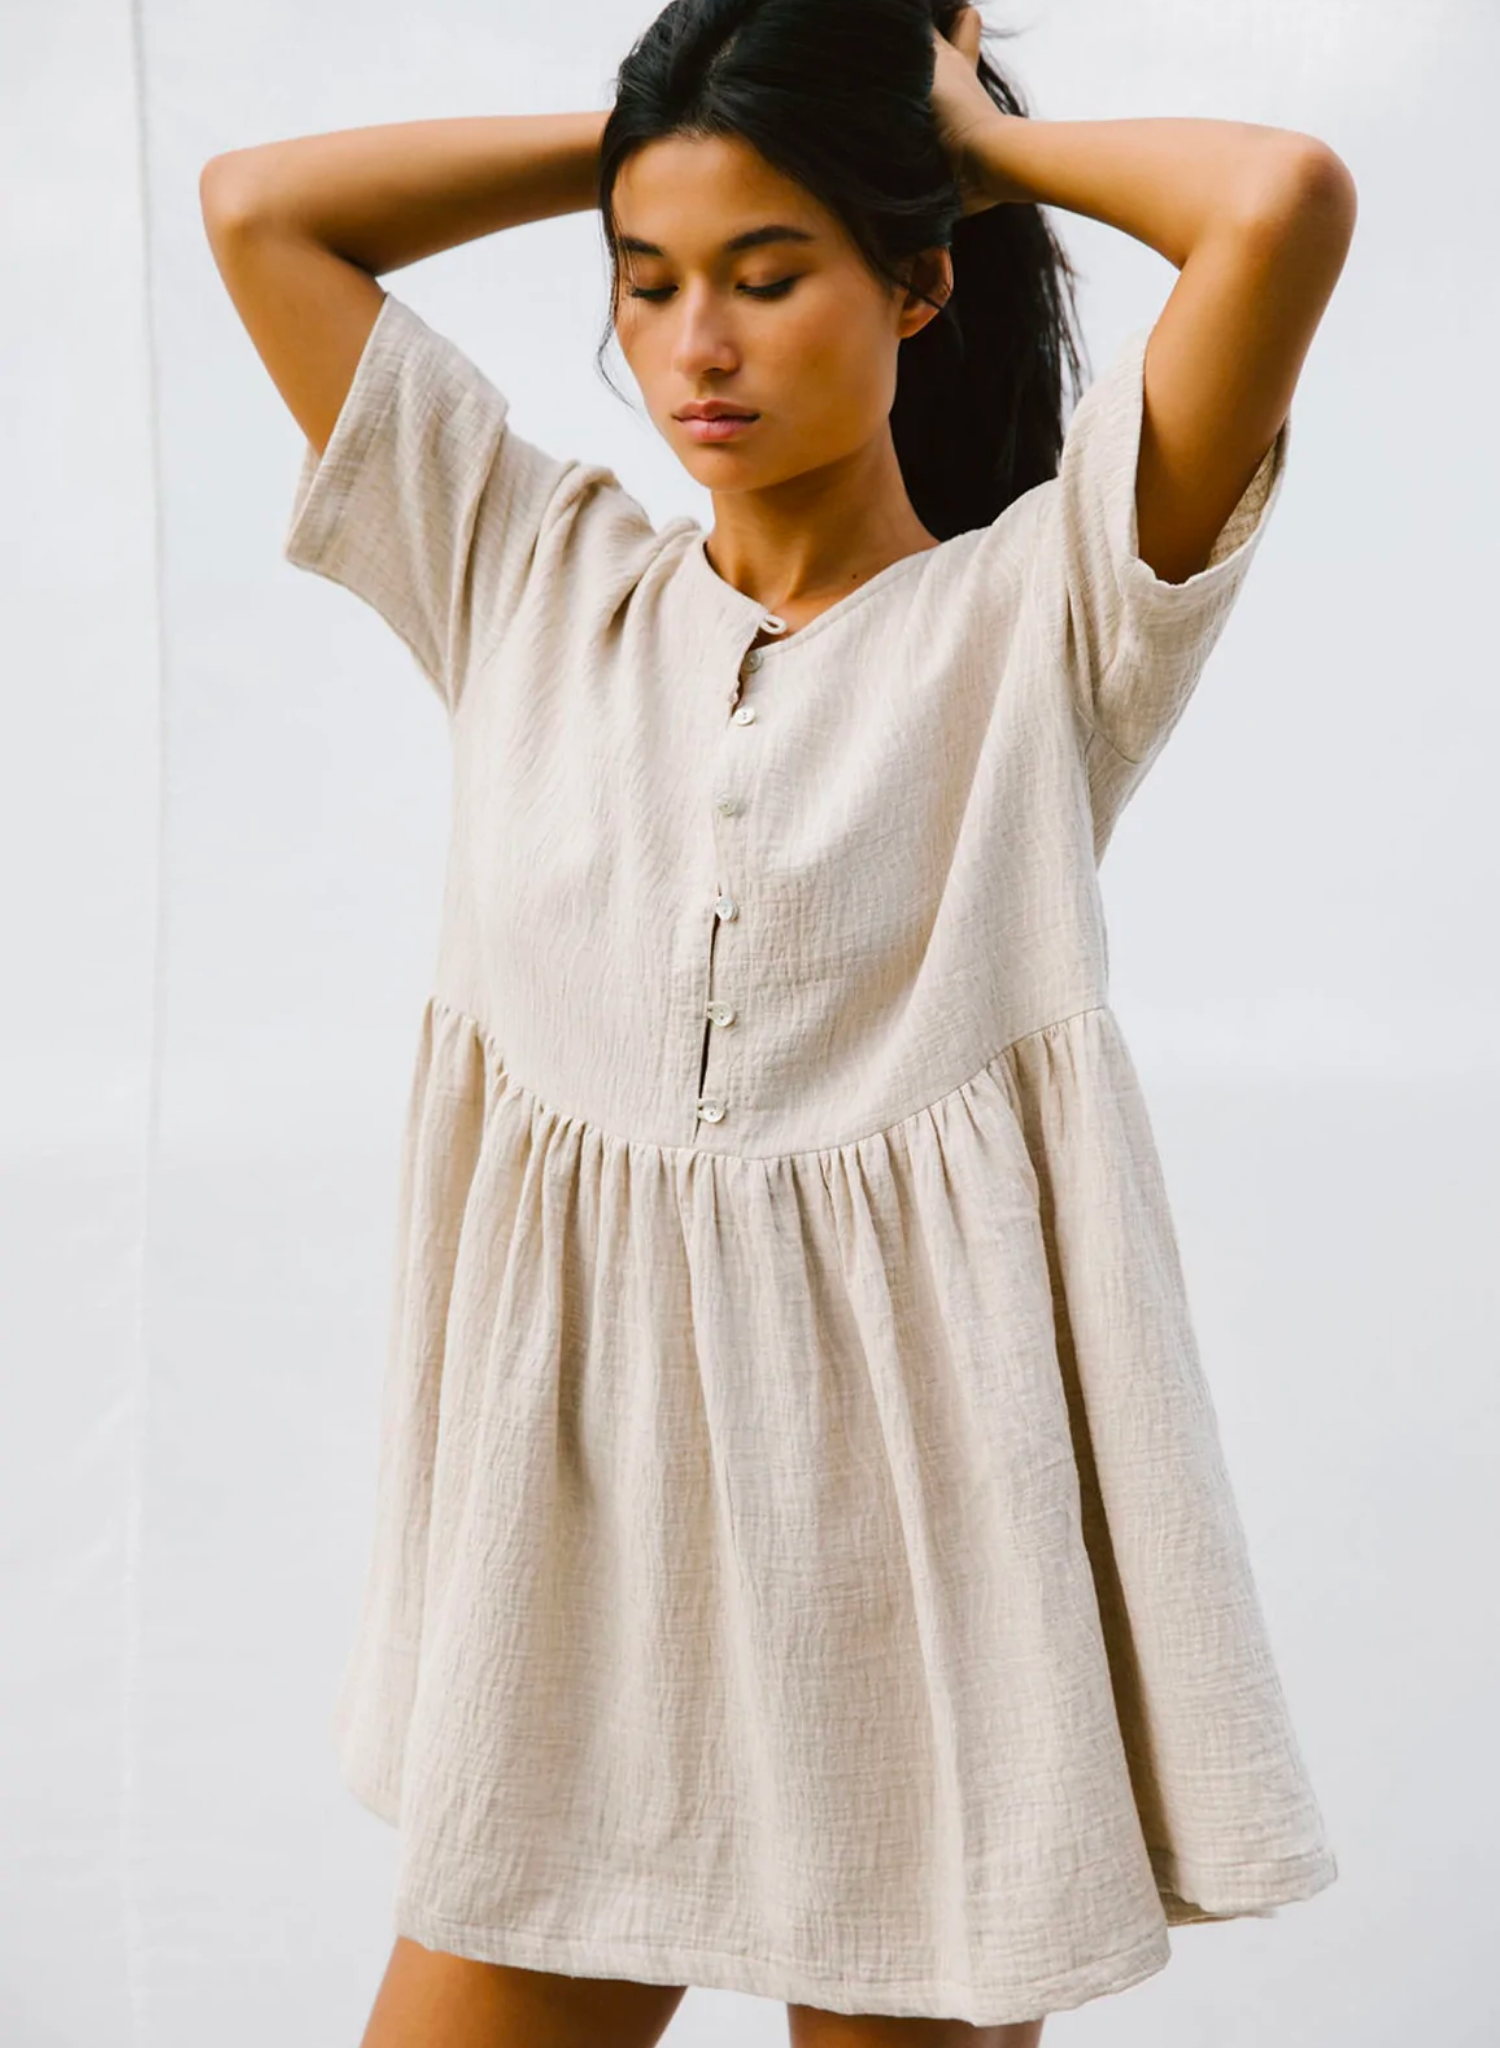 This cool and breezy piece is the perfect ‘chuck on’ to get you through those warmer months. Made from a lightweight cotton. The Darcey dress has become a cult favourite at TBR and we know you will love it. Featuring an oversized fit, wide neckline, button-down neckline, babydoll skirt and a flattering wide sleeve.